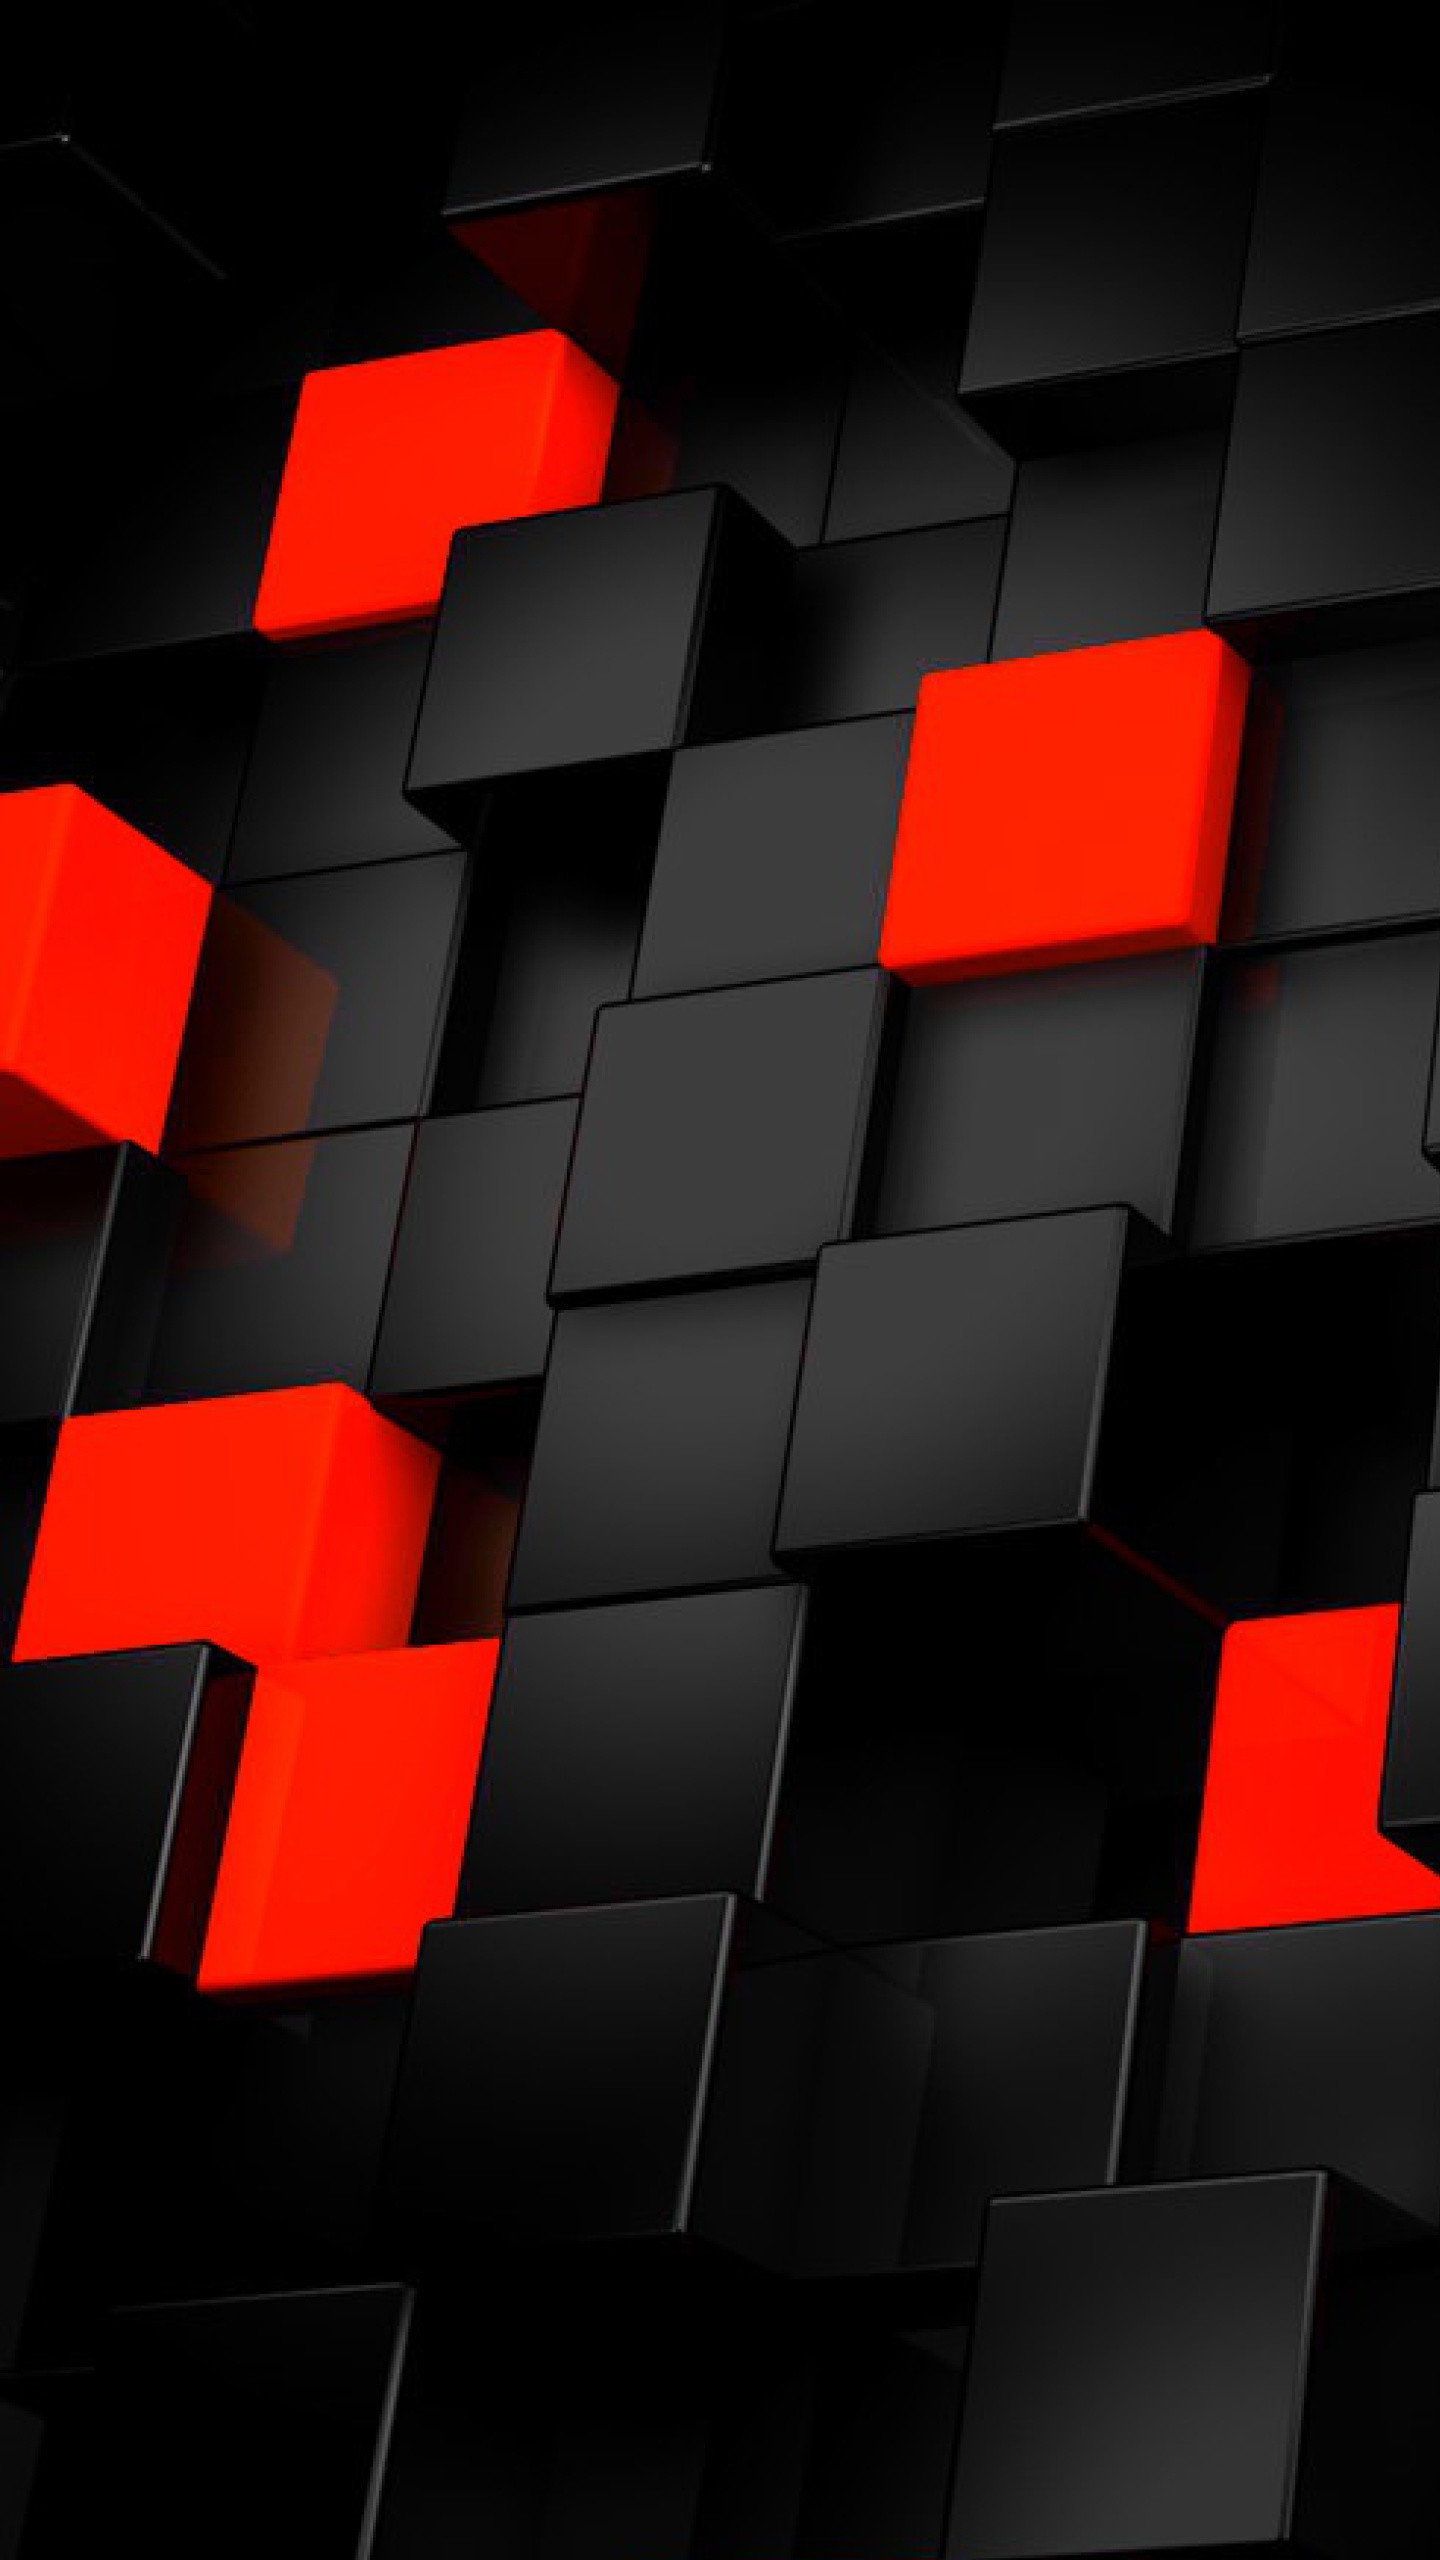 1440x2560 Download the Android Many Cubes wallpaper